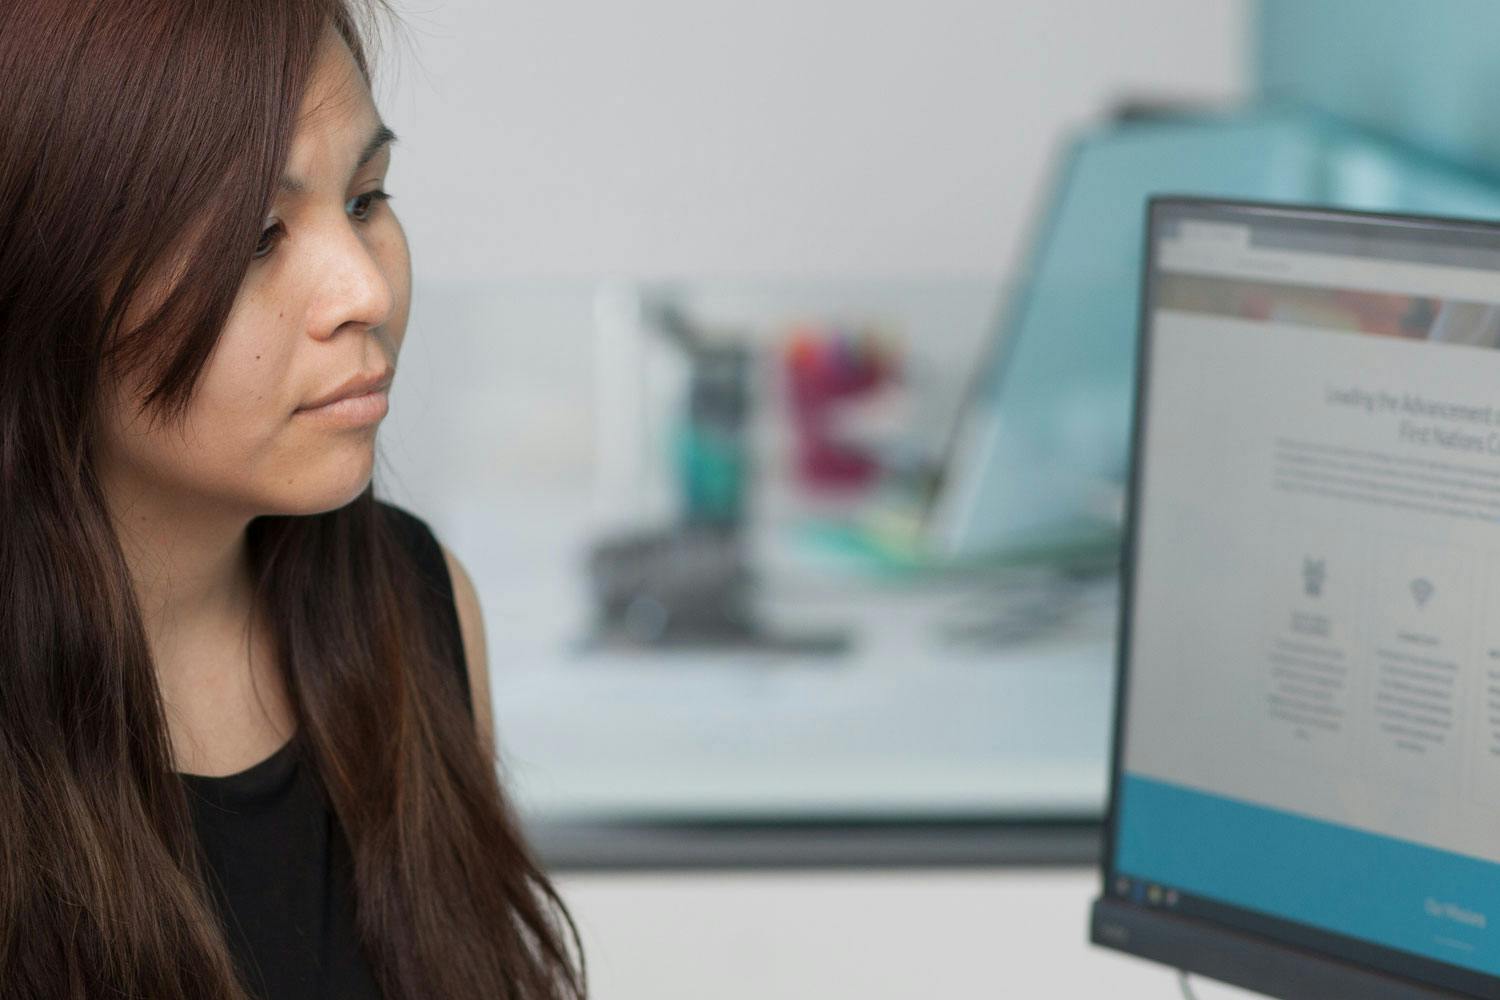 A woman with light brown skin and reddish-brown hair looks at a computer monitor.